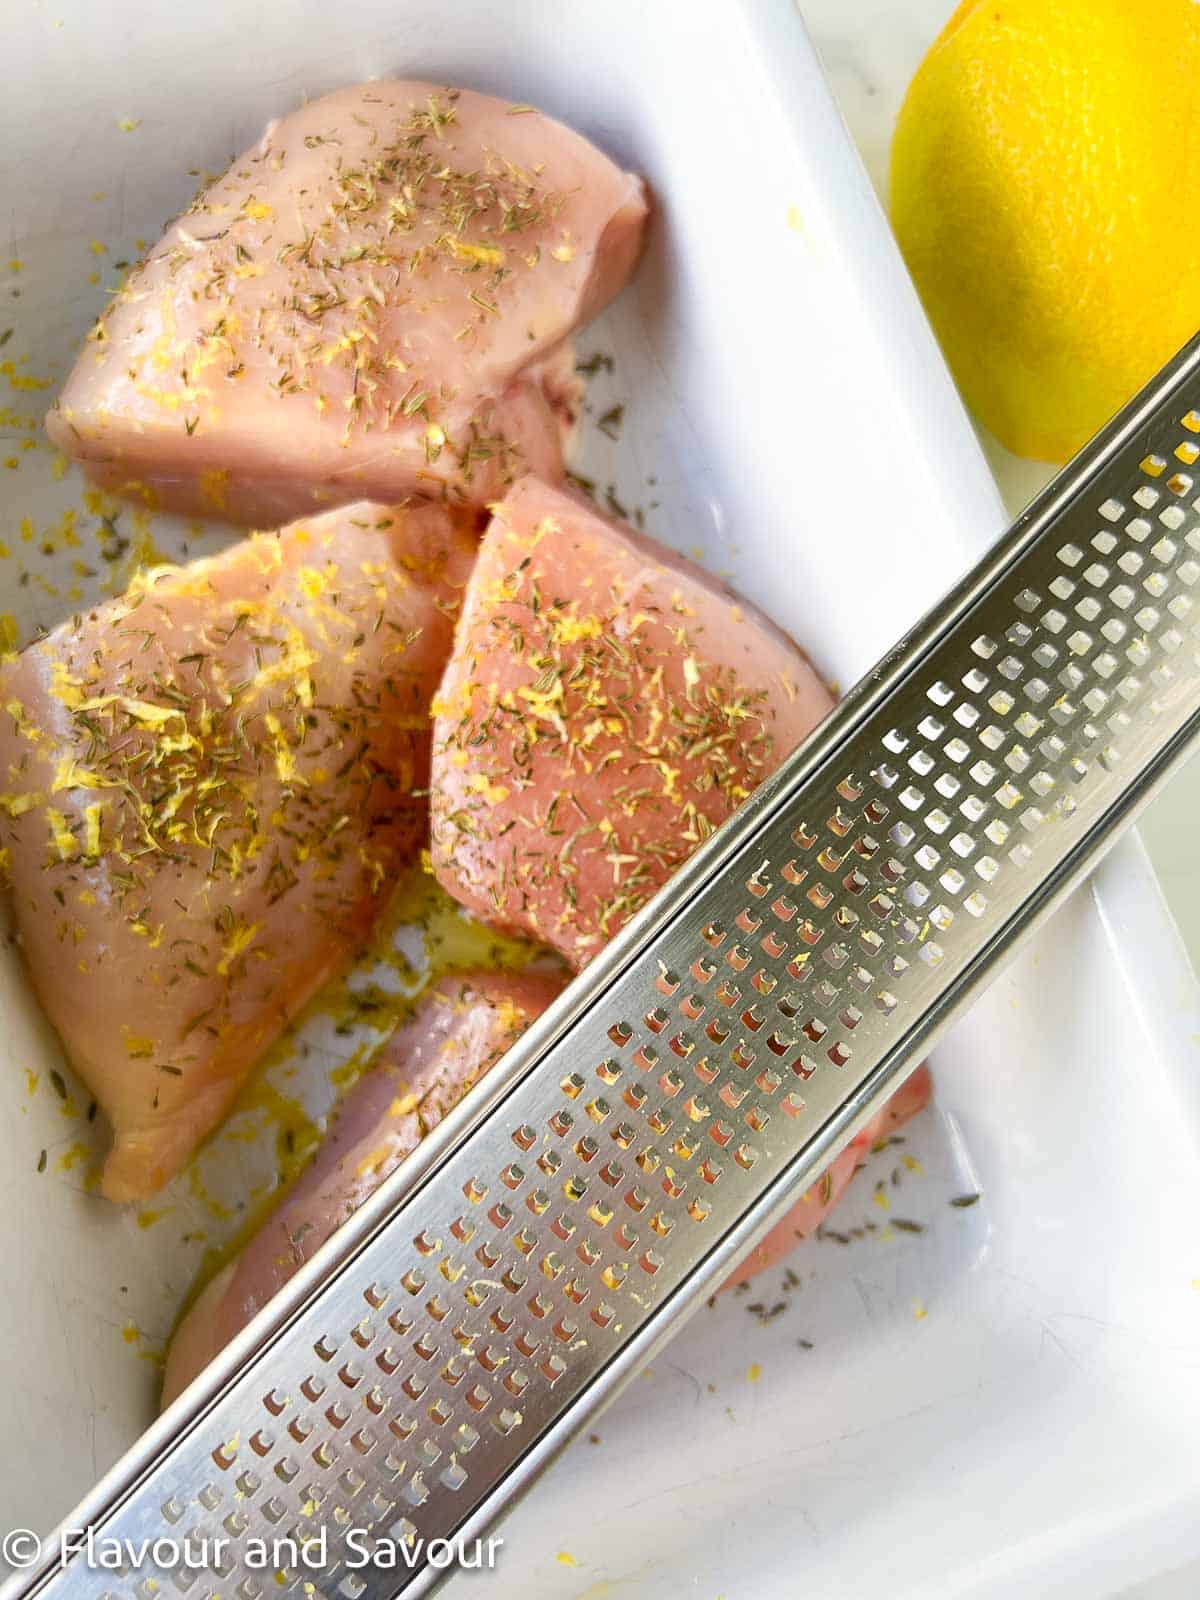 Raw chicken breasts coated with salt, pepper and lemon zest.